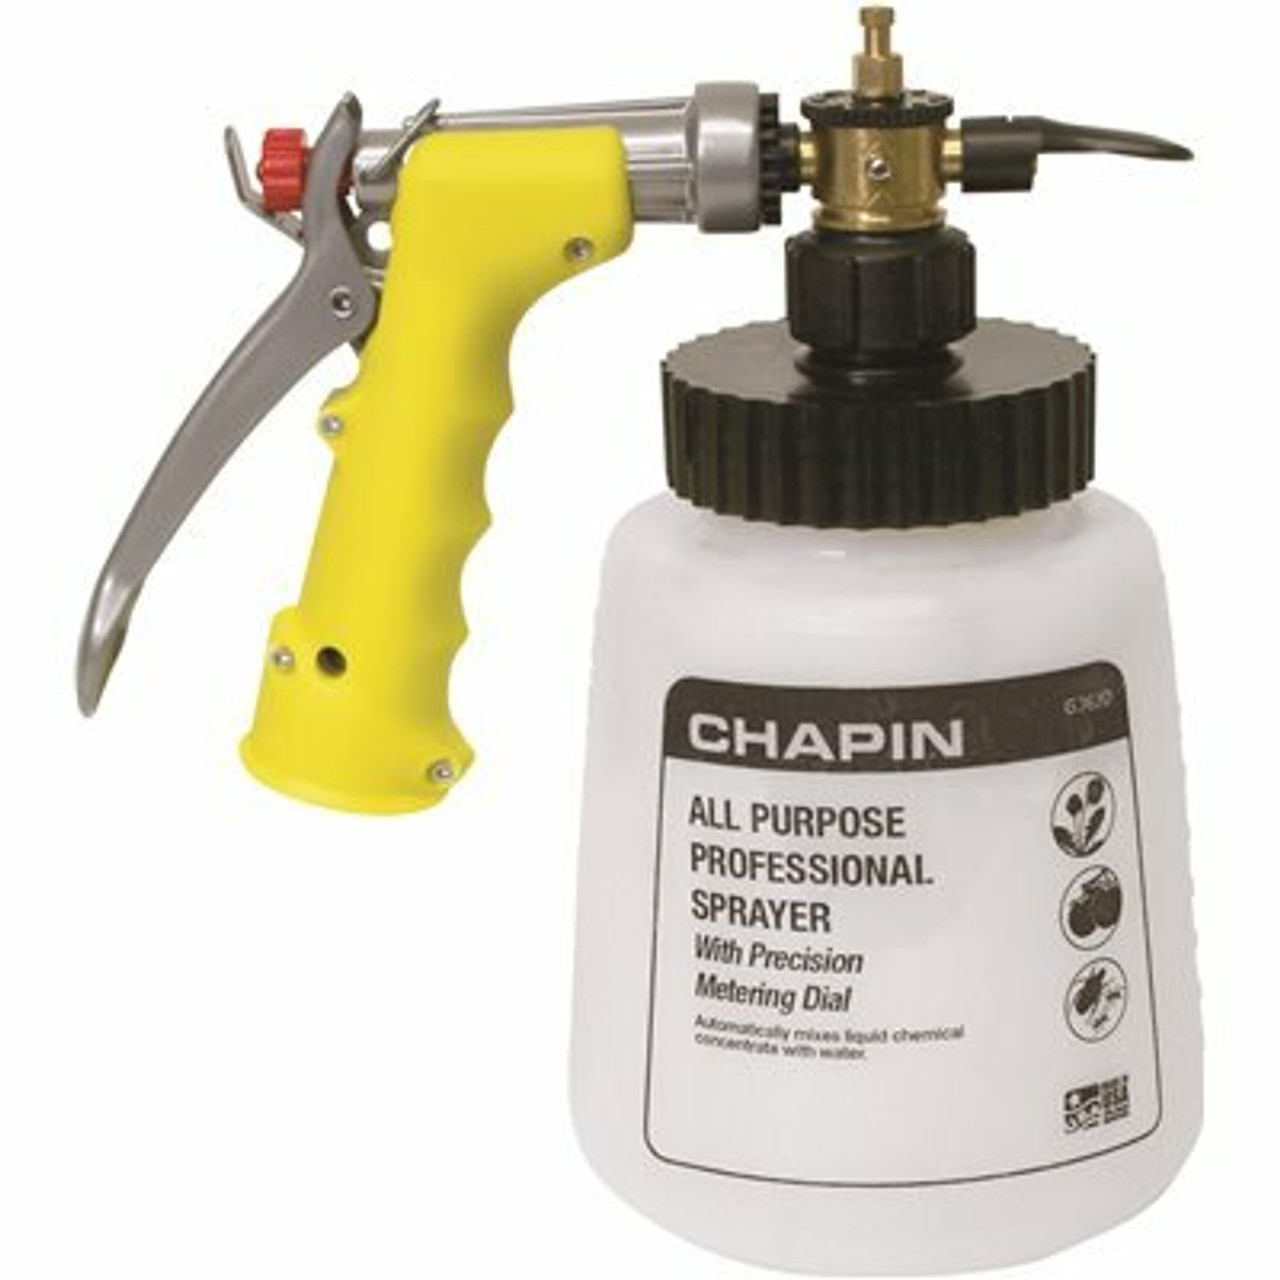 Chapin Professional All-Purpose Sprayer With Metering Dial Sprays Up To 320 Gal.